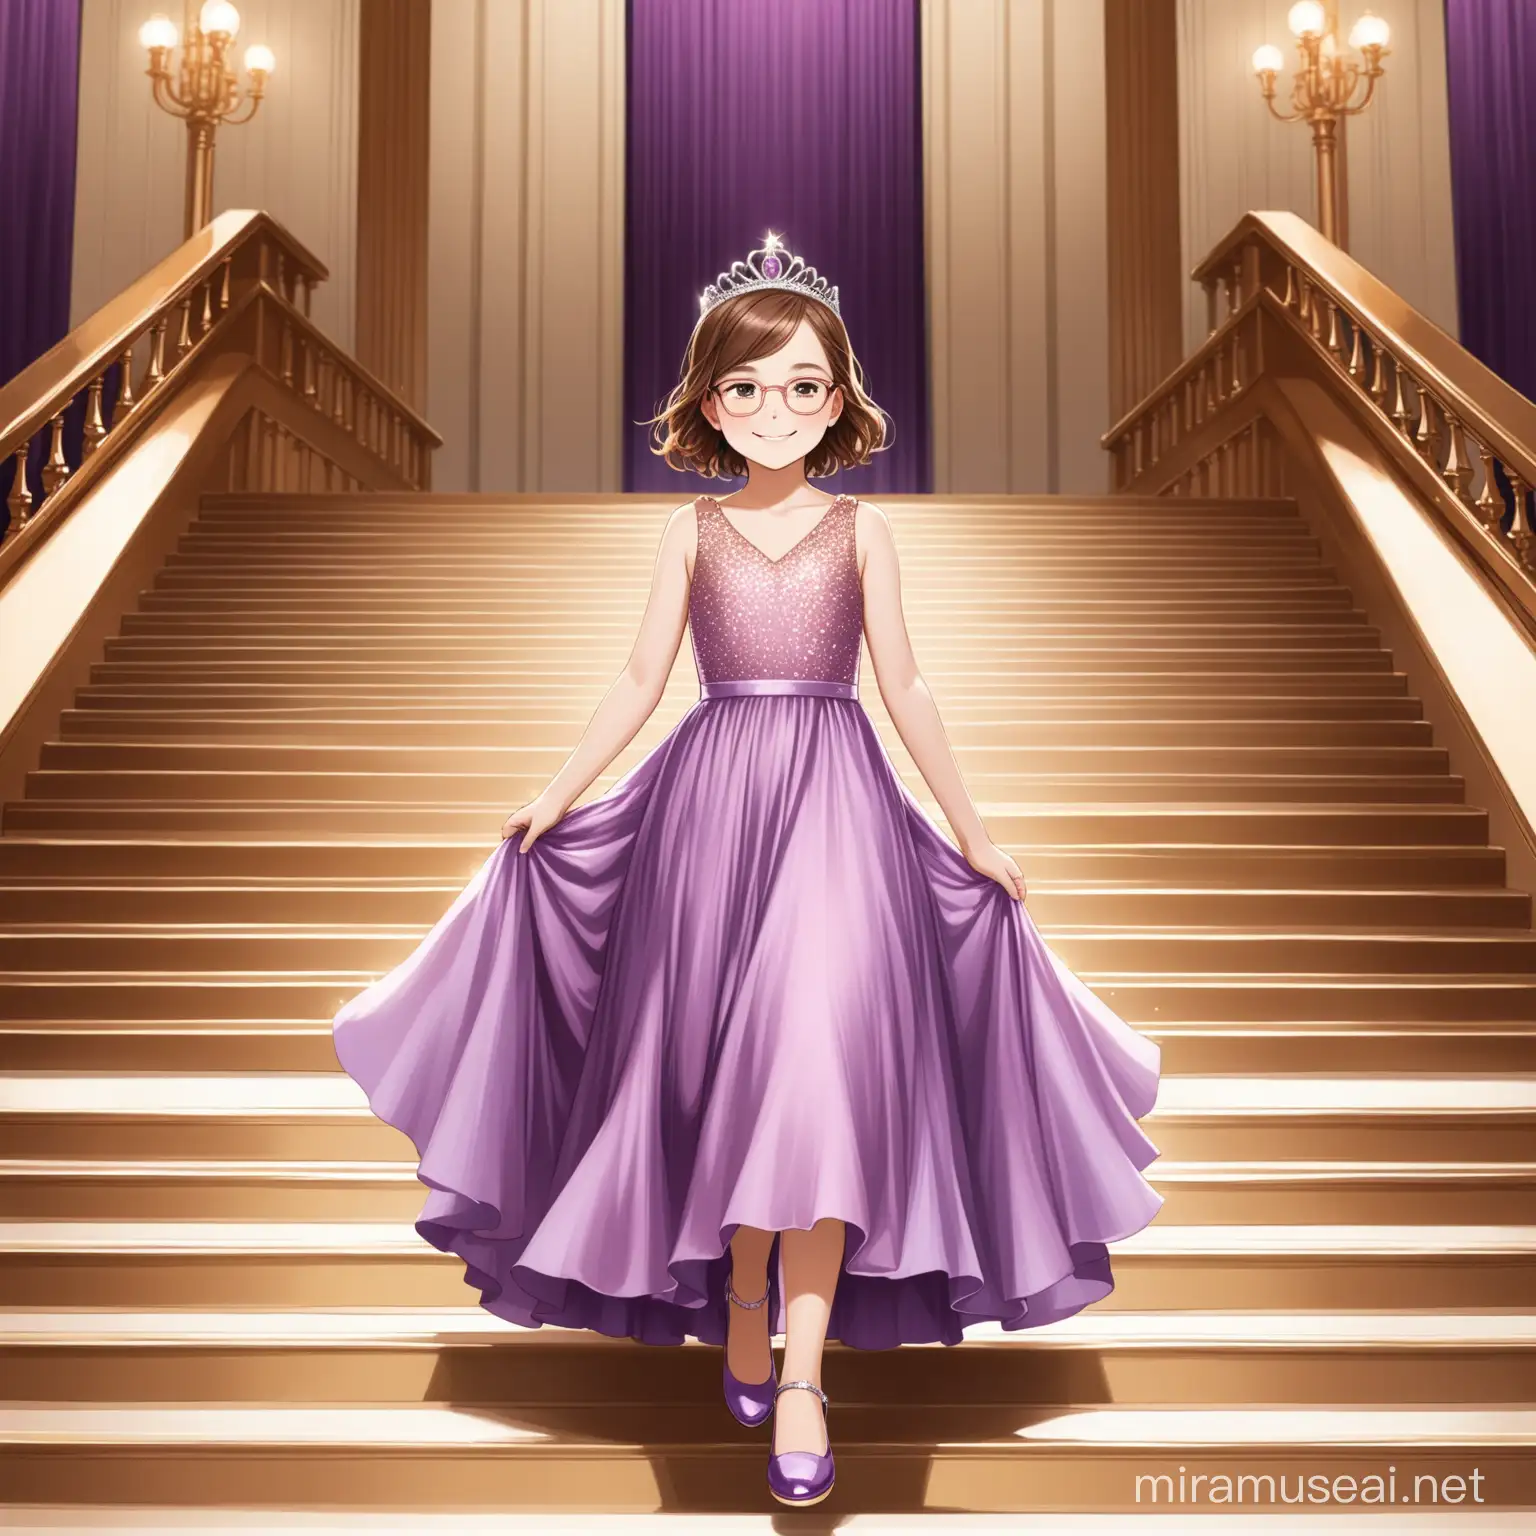 Graceful 12YearOld Girl Descending Grand Staircase in Elegant Purple Evening Gown and Silver Tiara